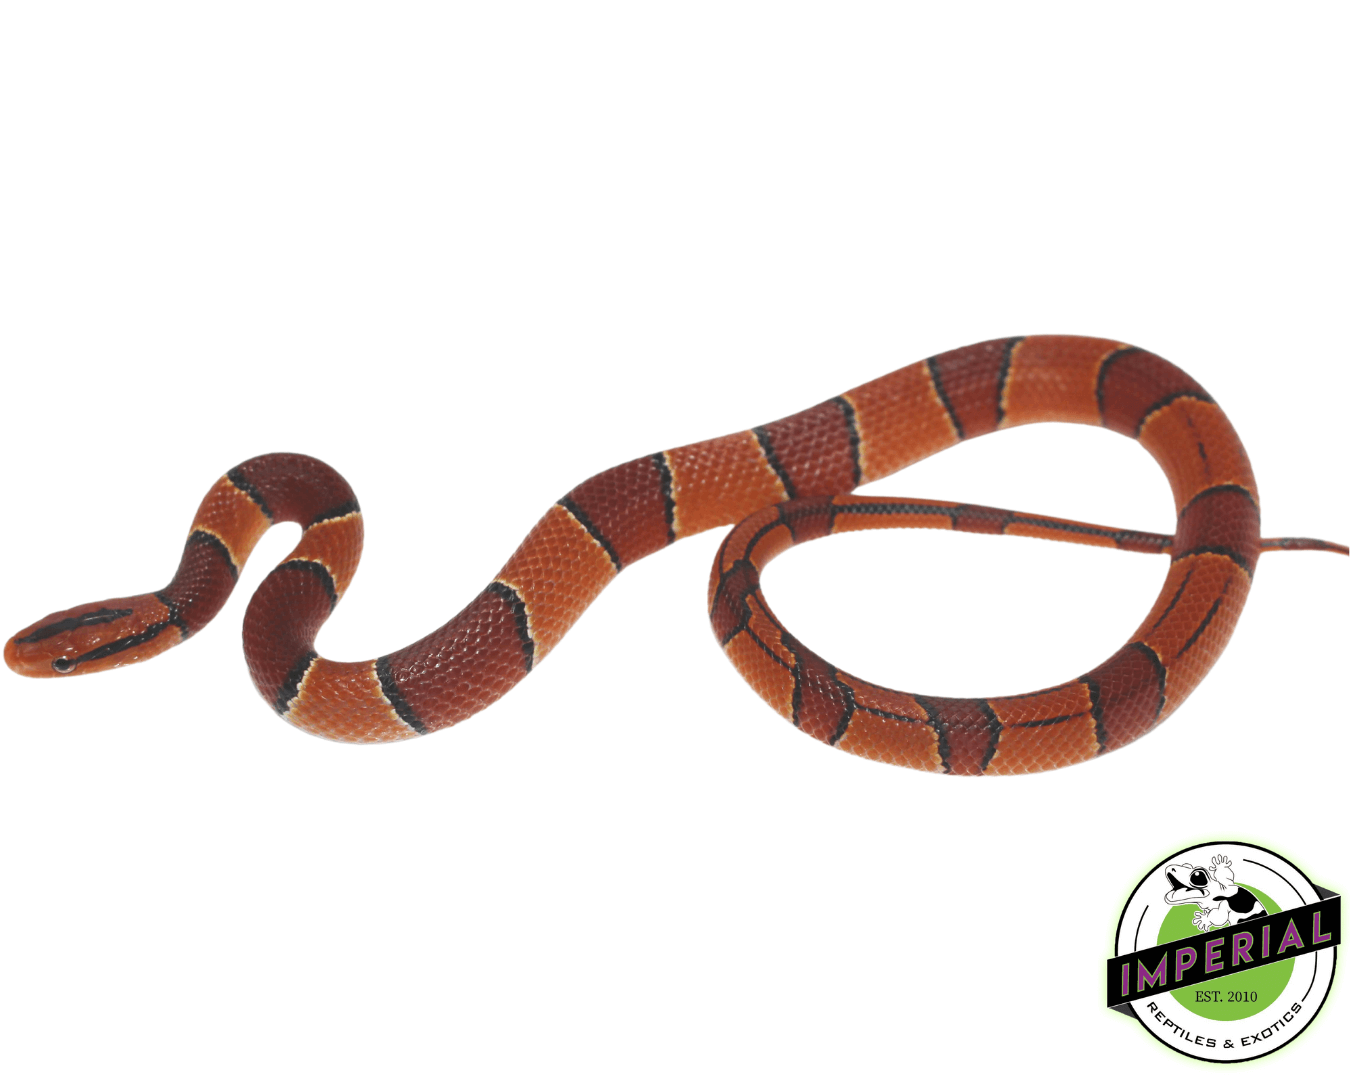 broad banded mountain rat snake for sale, buy reptiles online